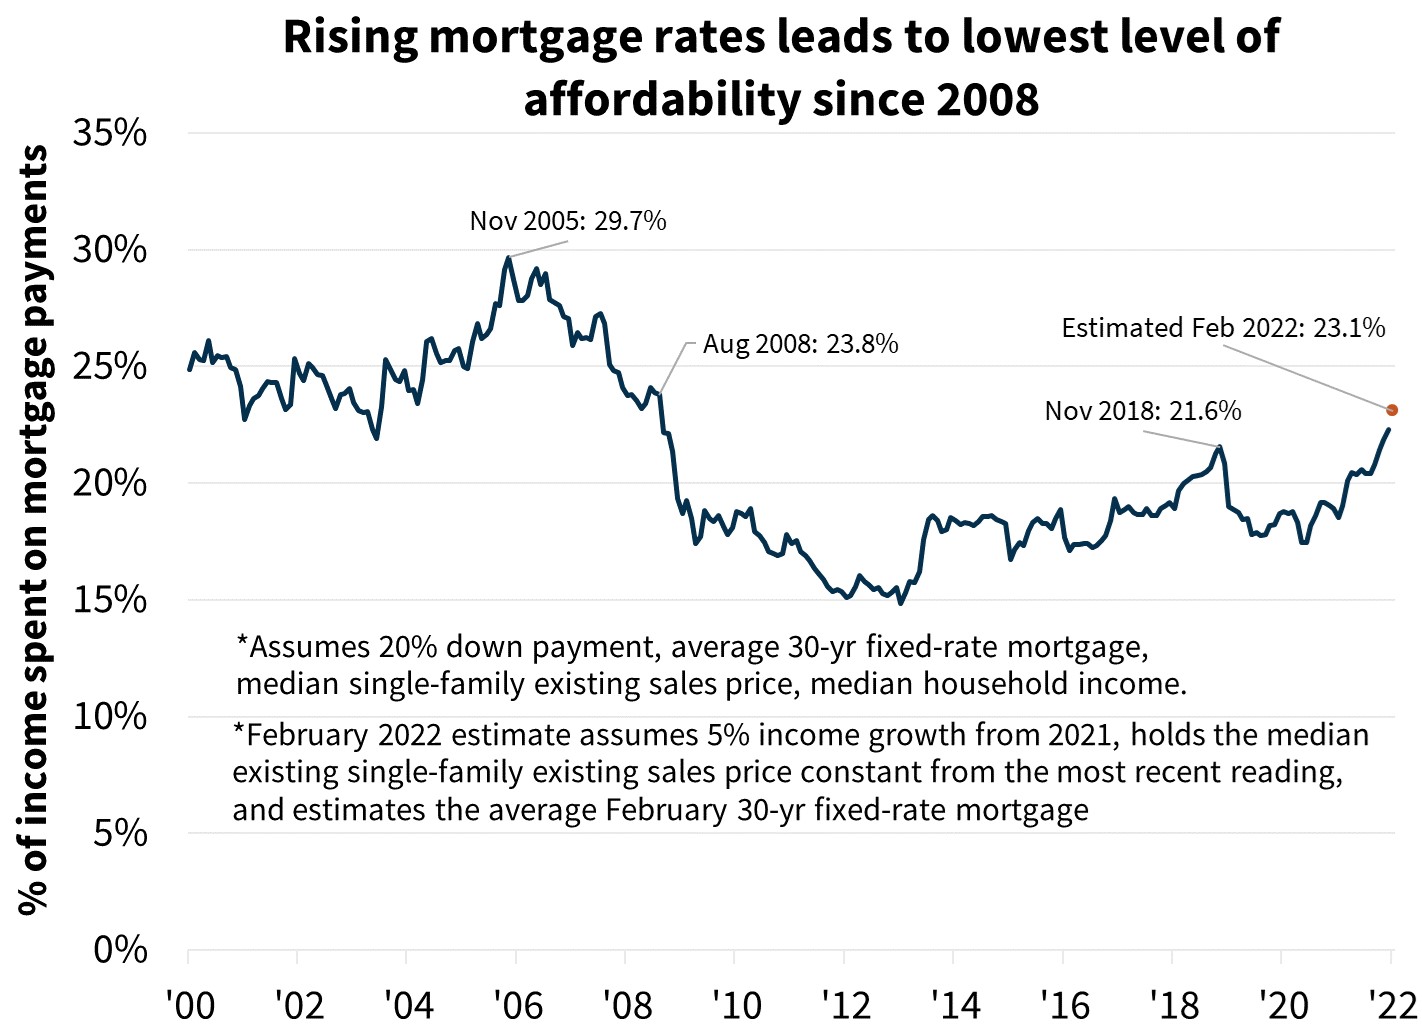  Rising mortgage rates leads to lowest level of affordability since 2008